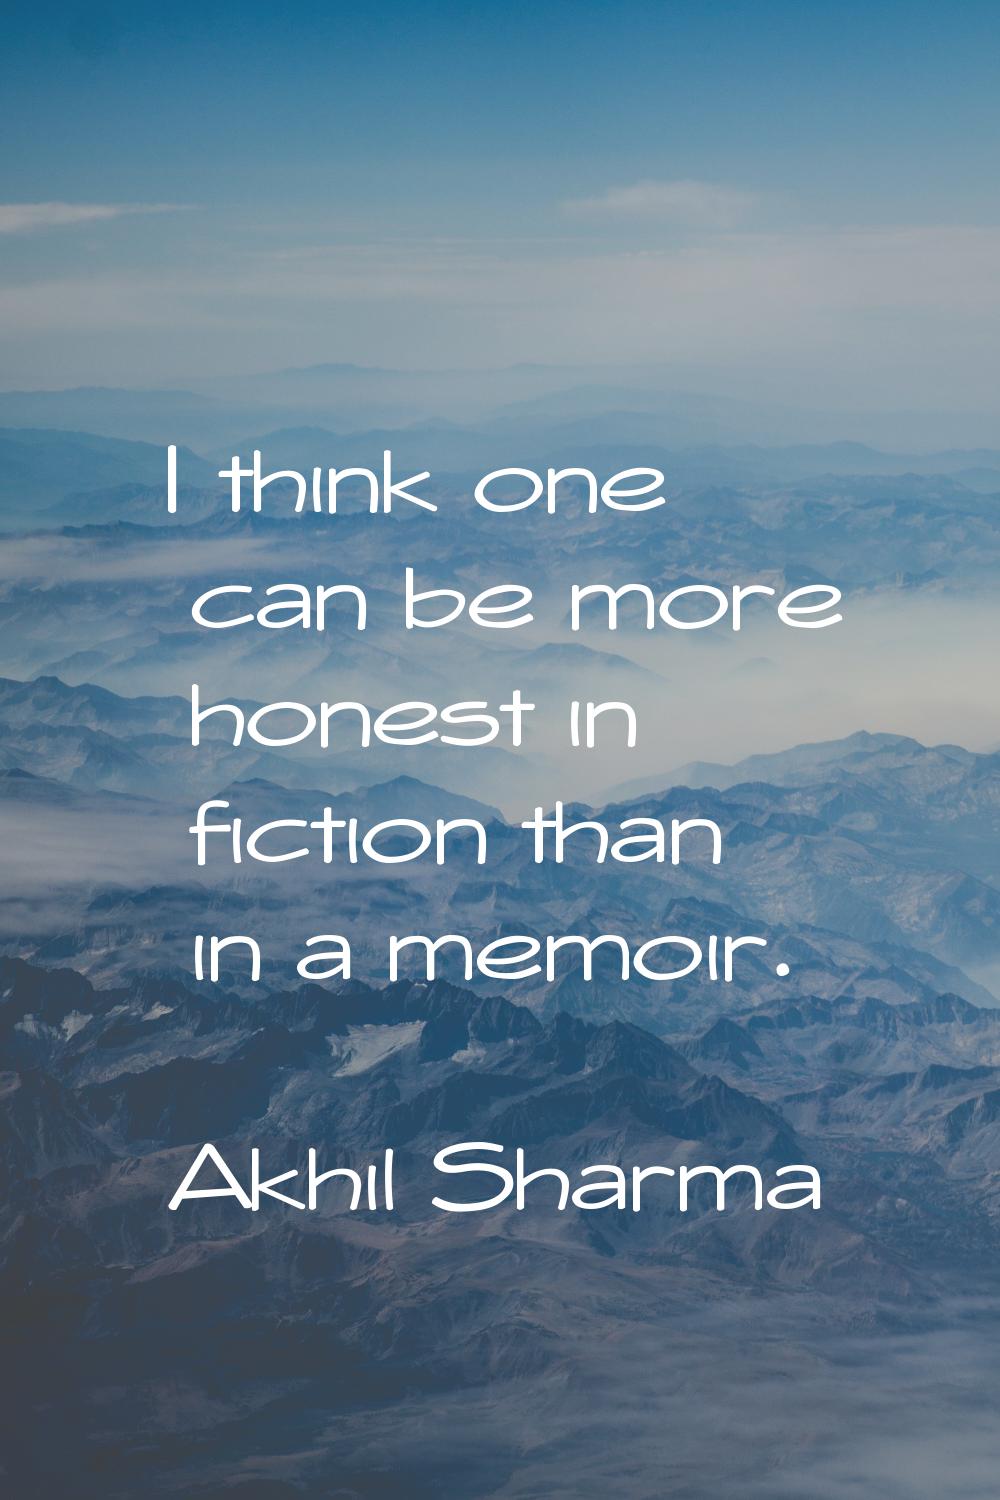 I think one can be more honest in fiction than in a memoir.